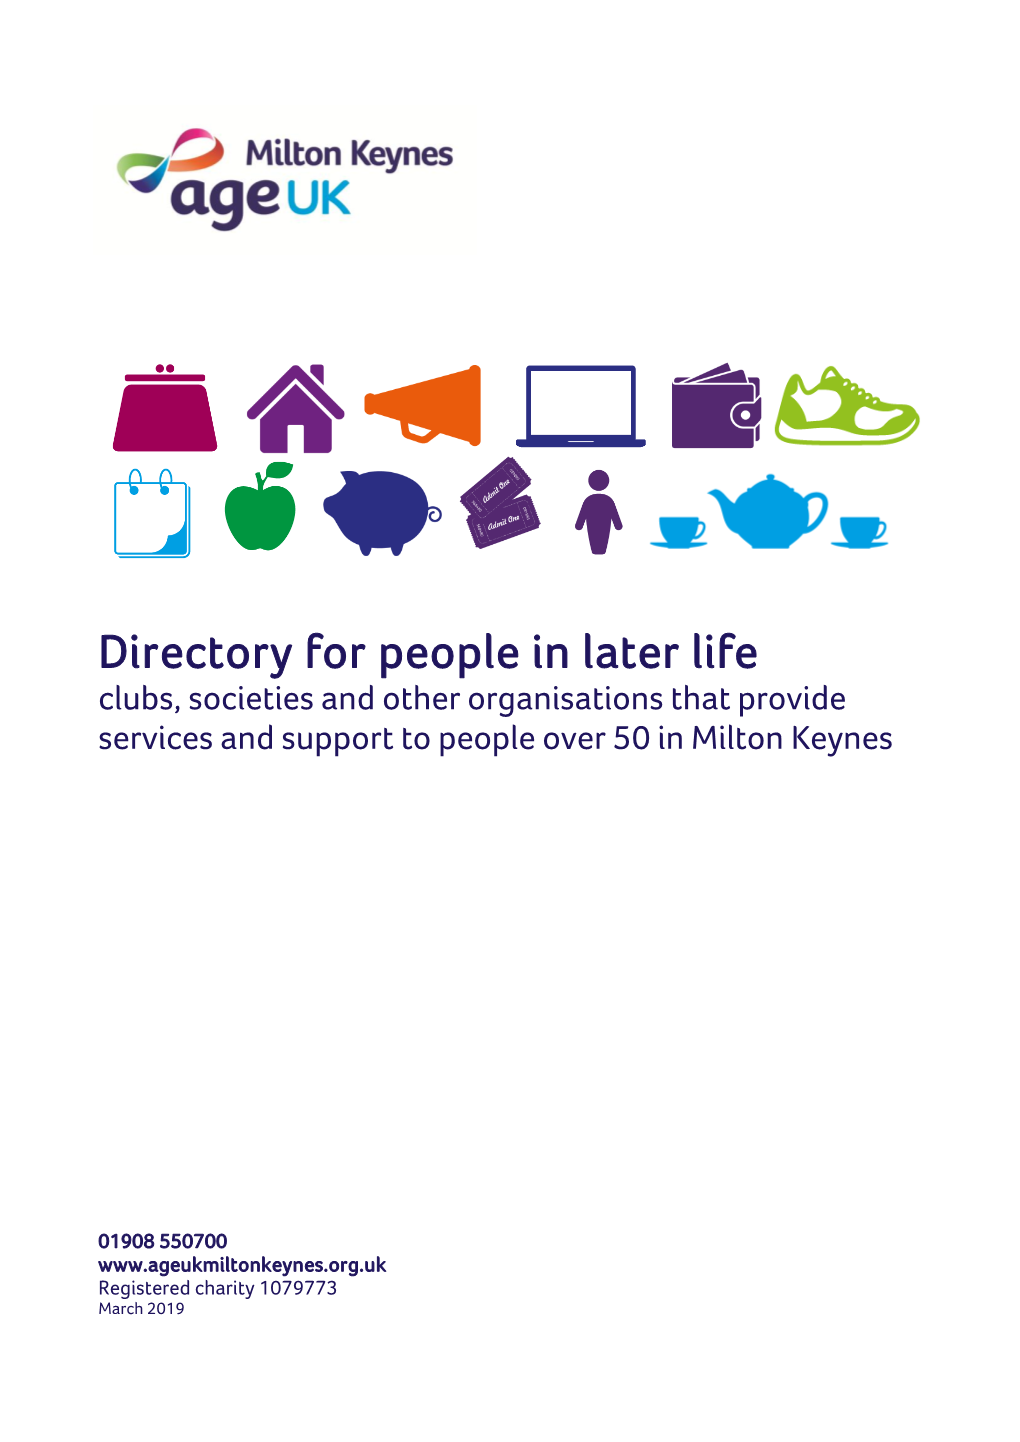 Directory for People in Later Life Clubs, Societies and Other Organisations That Provide Services and Support to People Over 50 in Milton Keynes